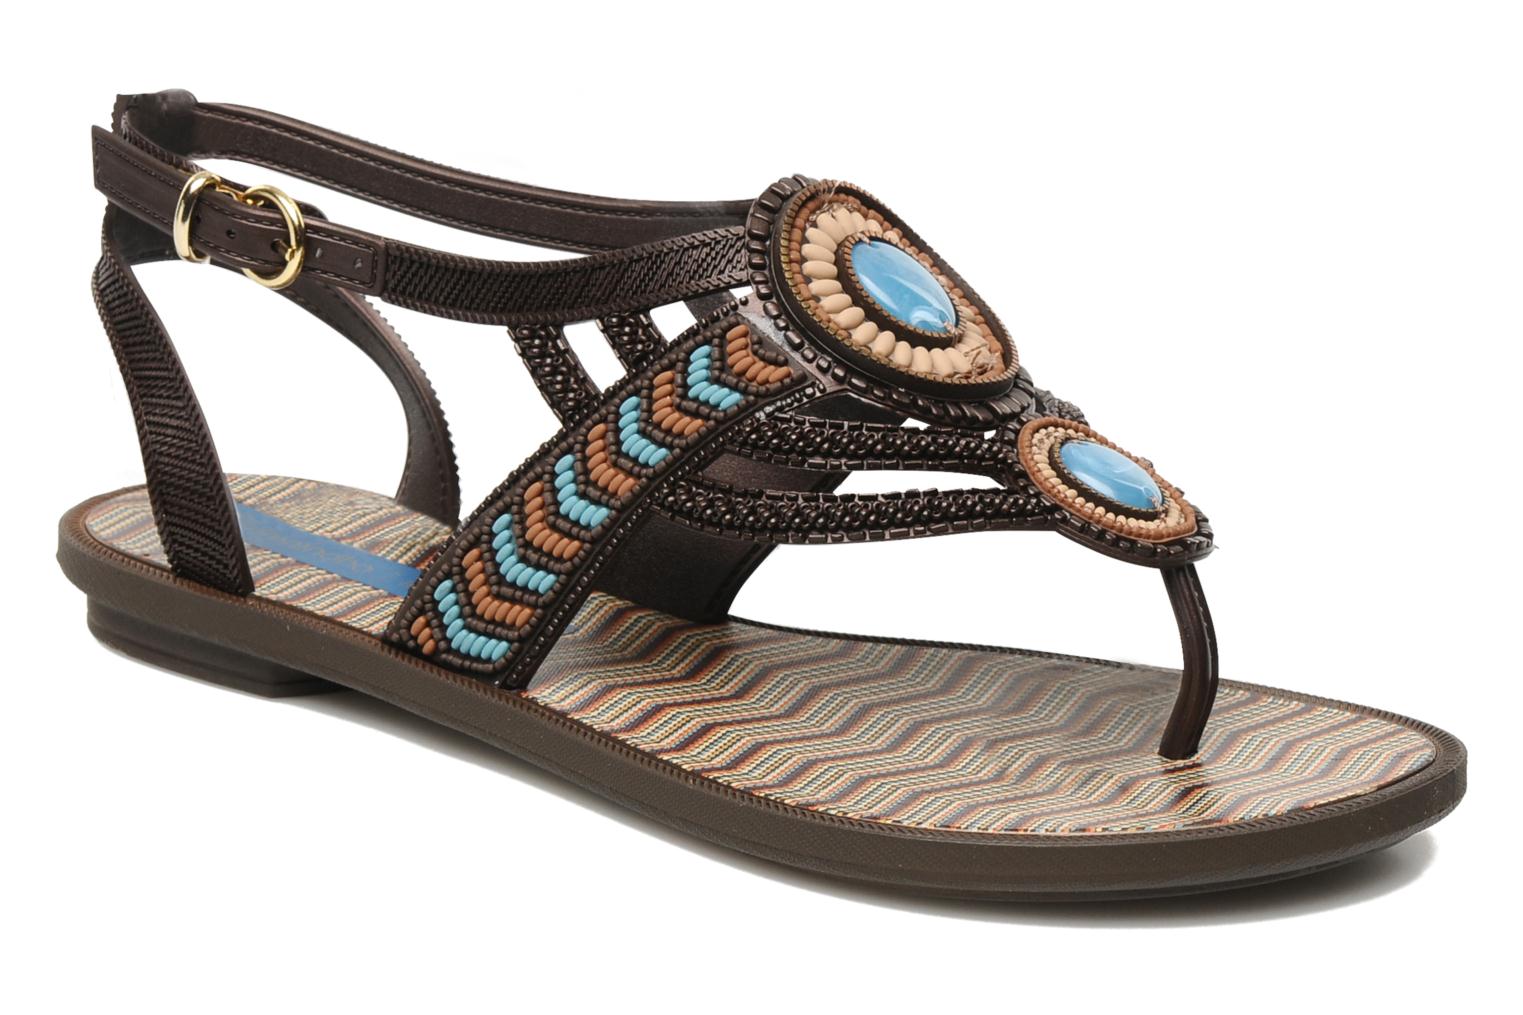 Grendha IS Navajo Sandal AD Sandals in Brown at Sarenza.co.uk (130896)